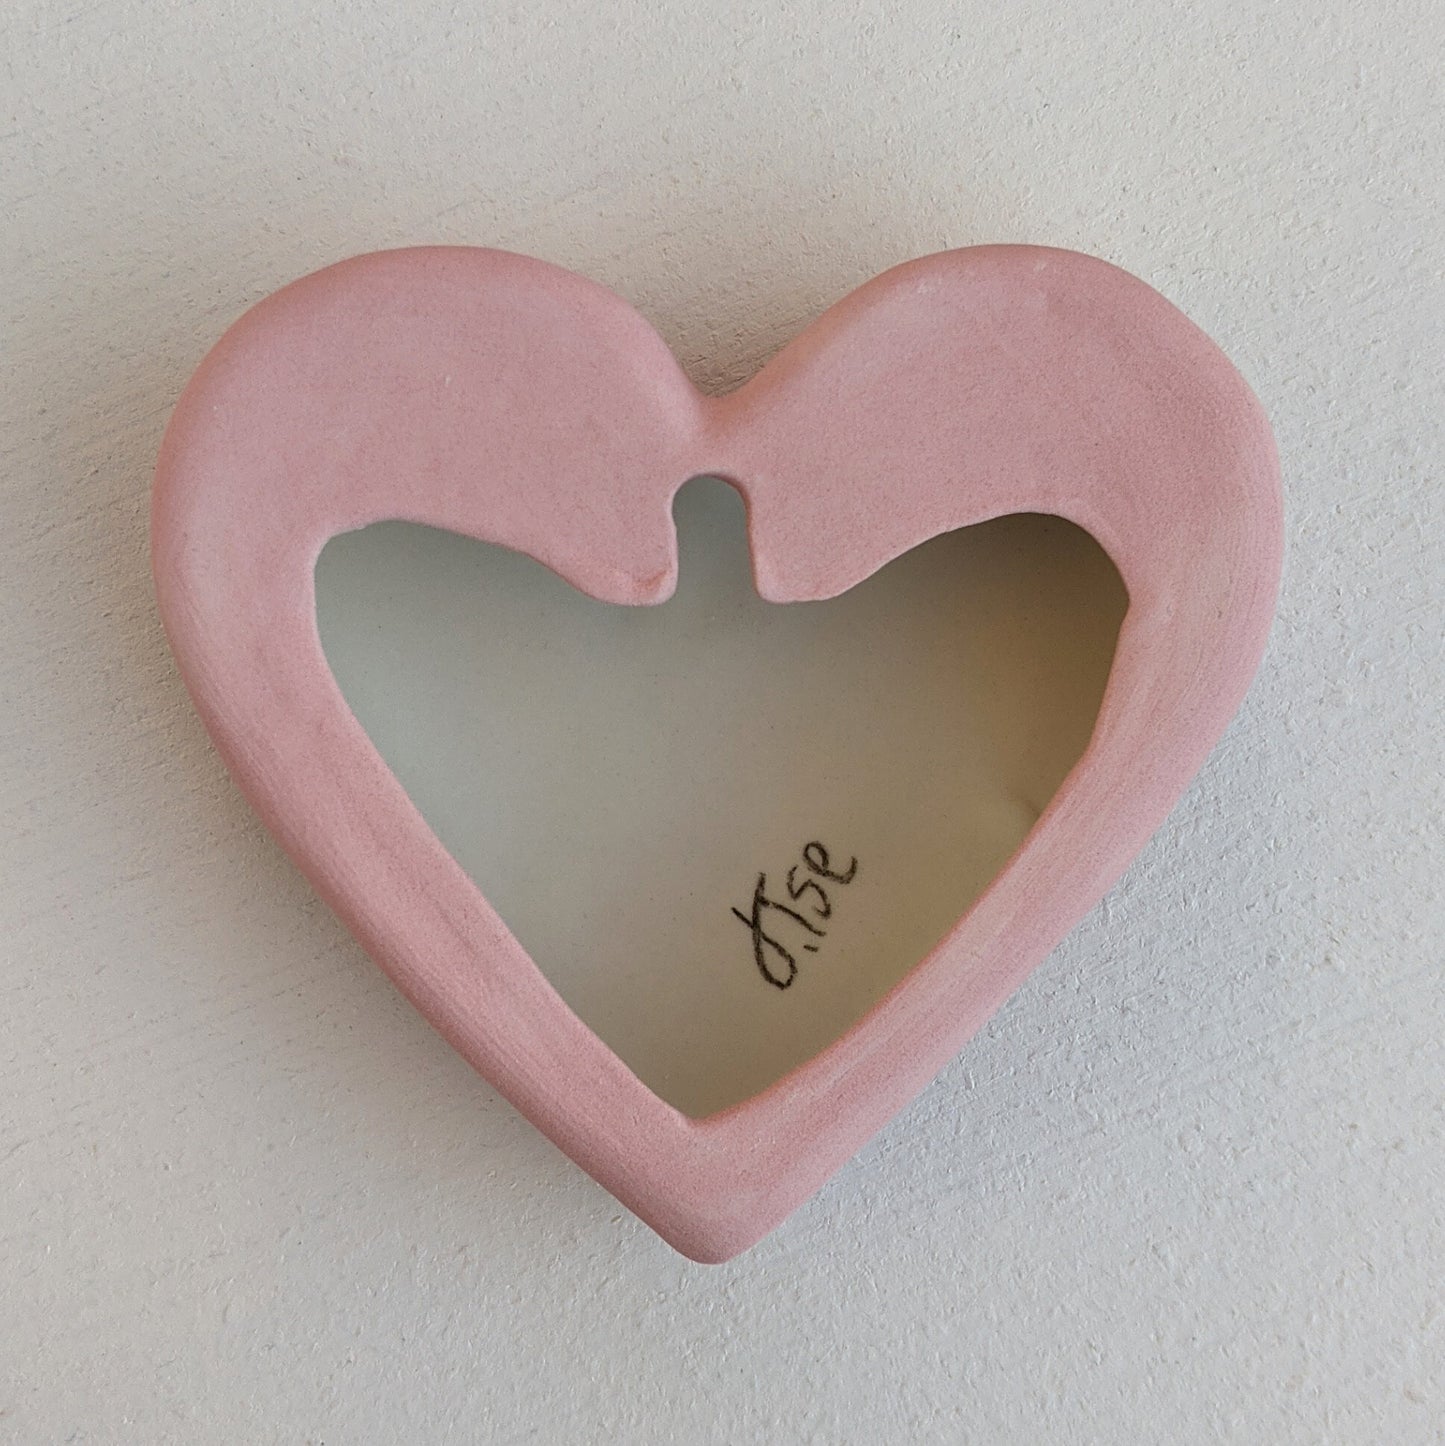 "EAT MY PUSSY" Porcelain Puffy Conversational Heart